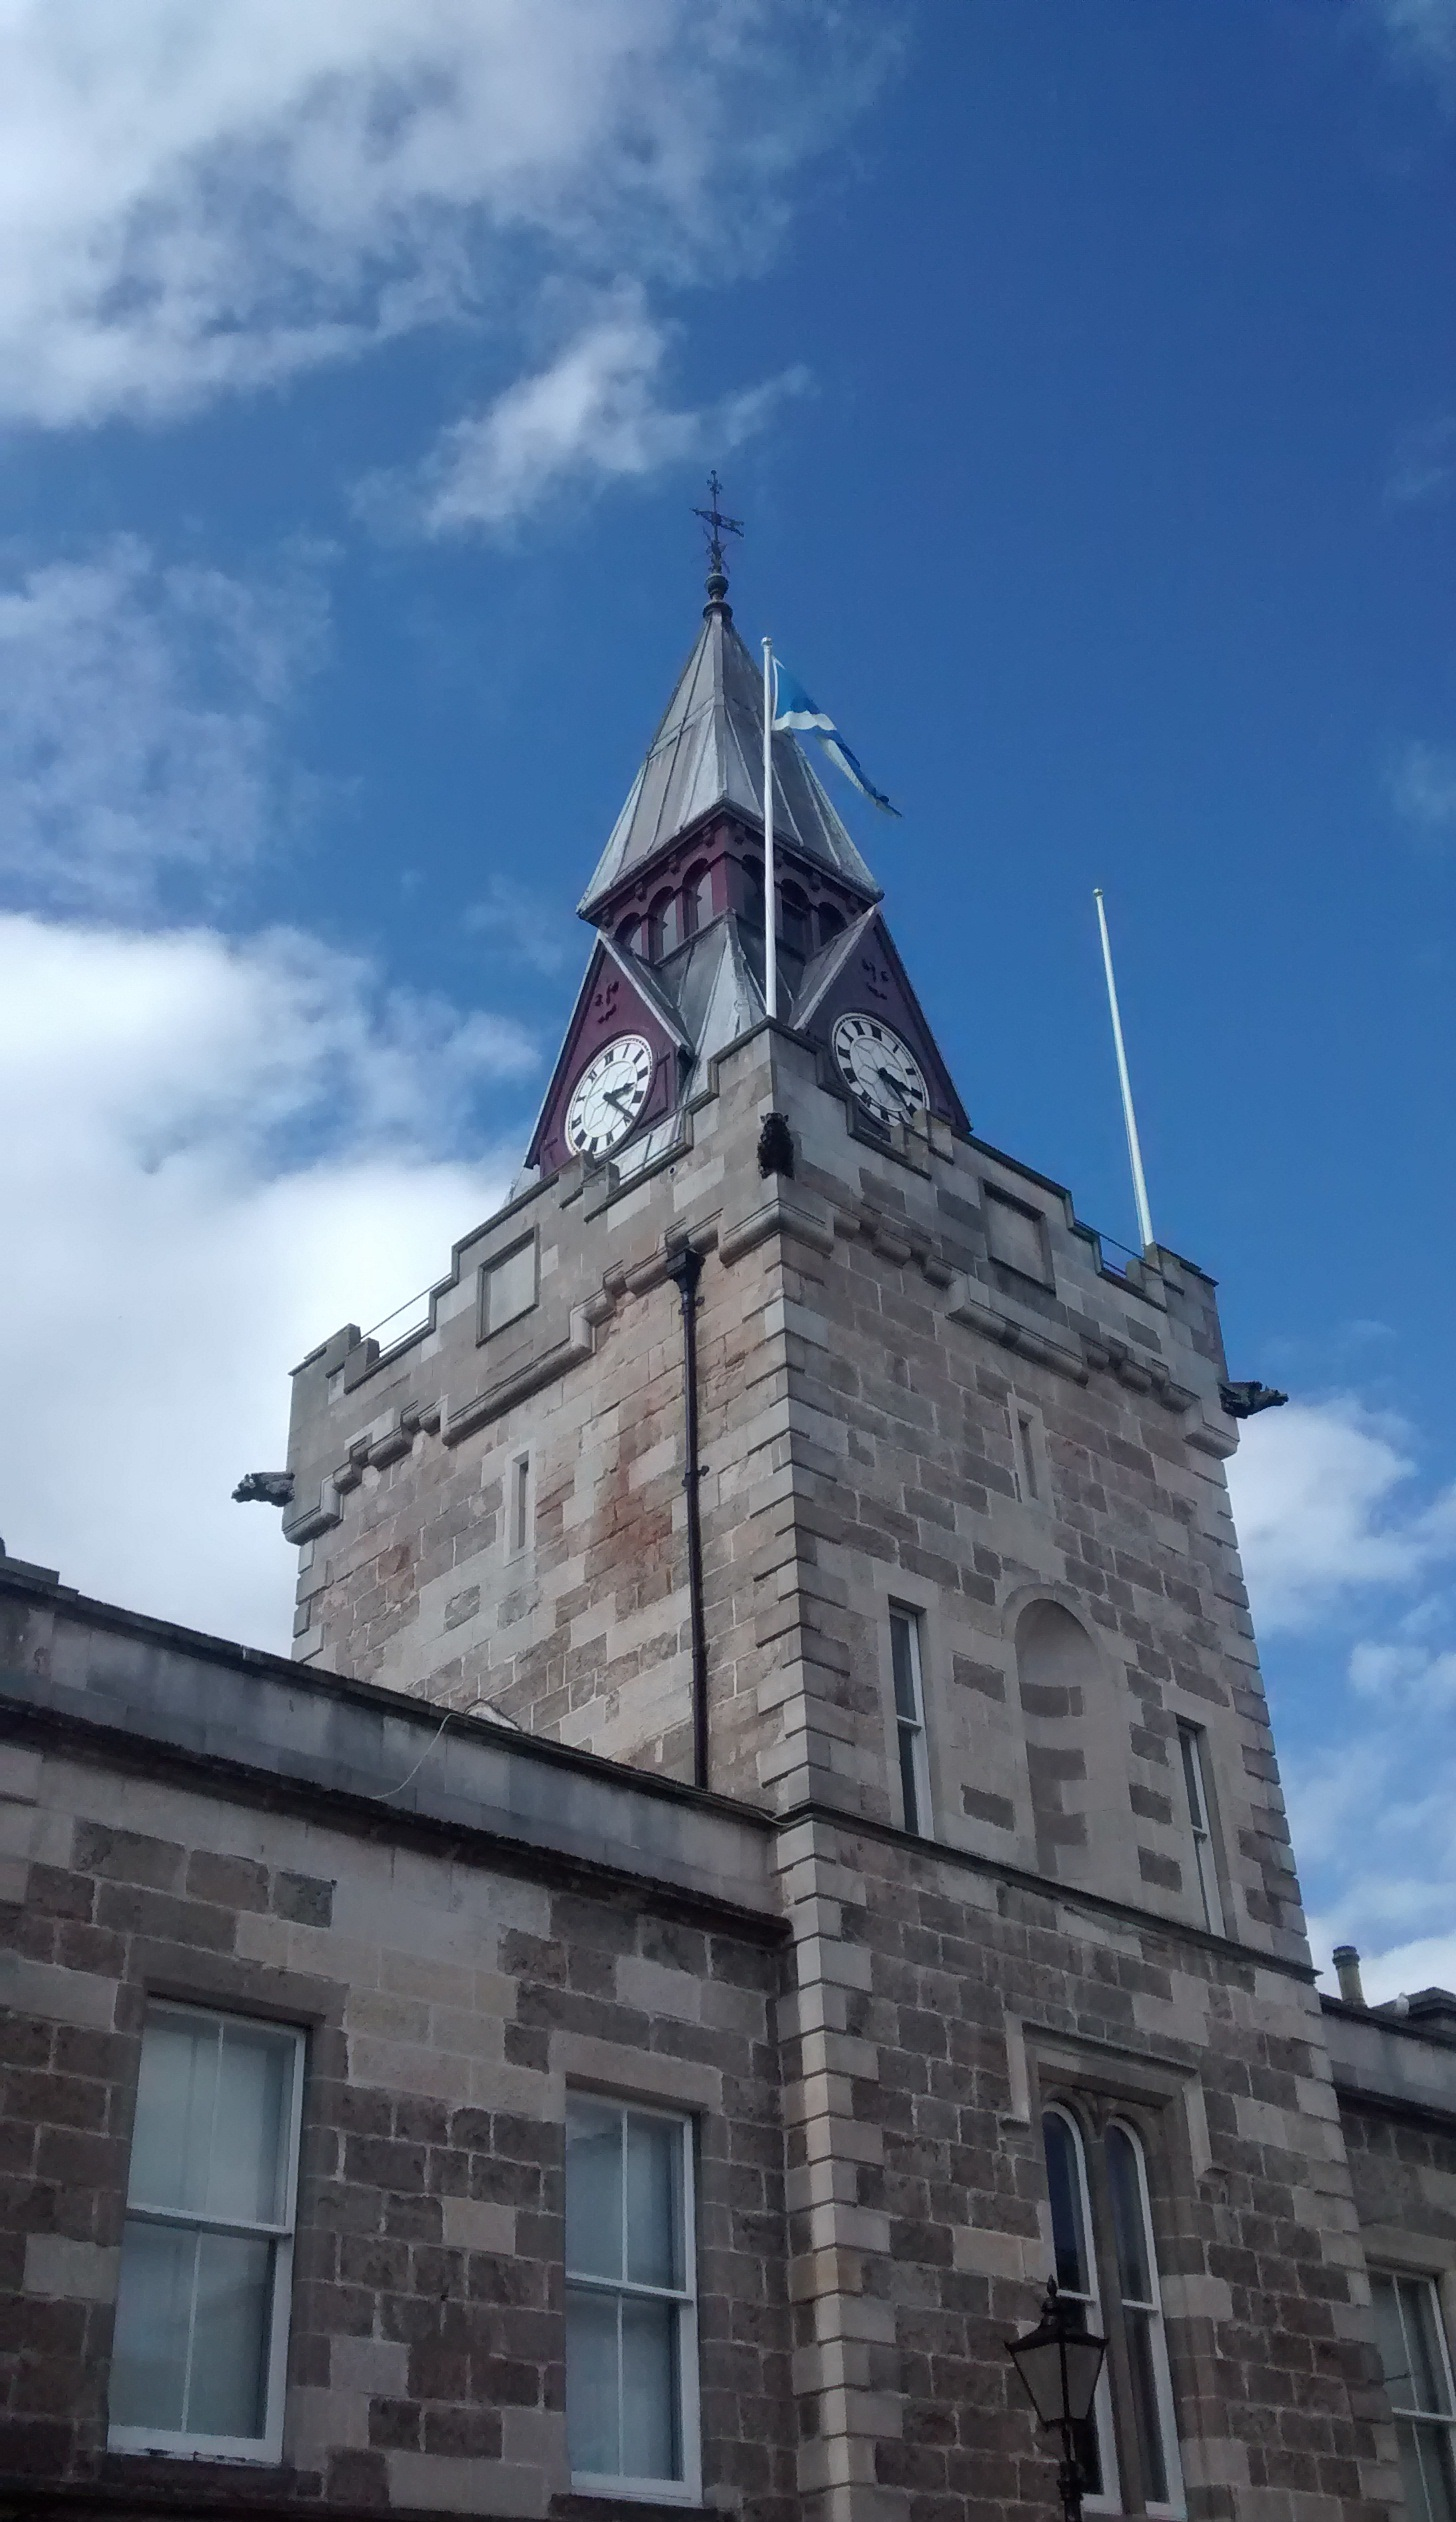 Contractor appointed for Nairn Courthouse revamp